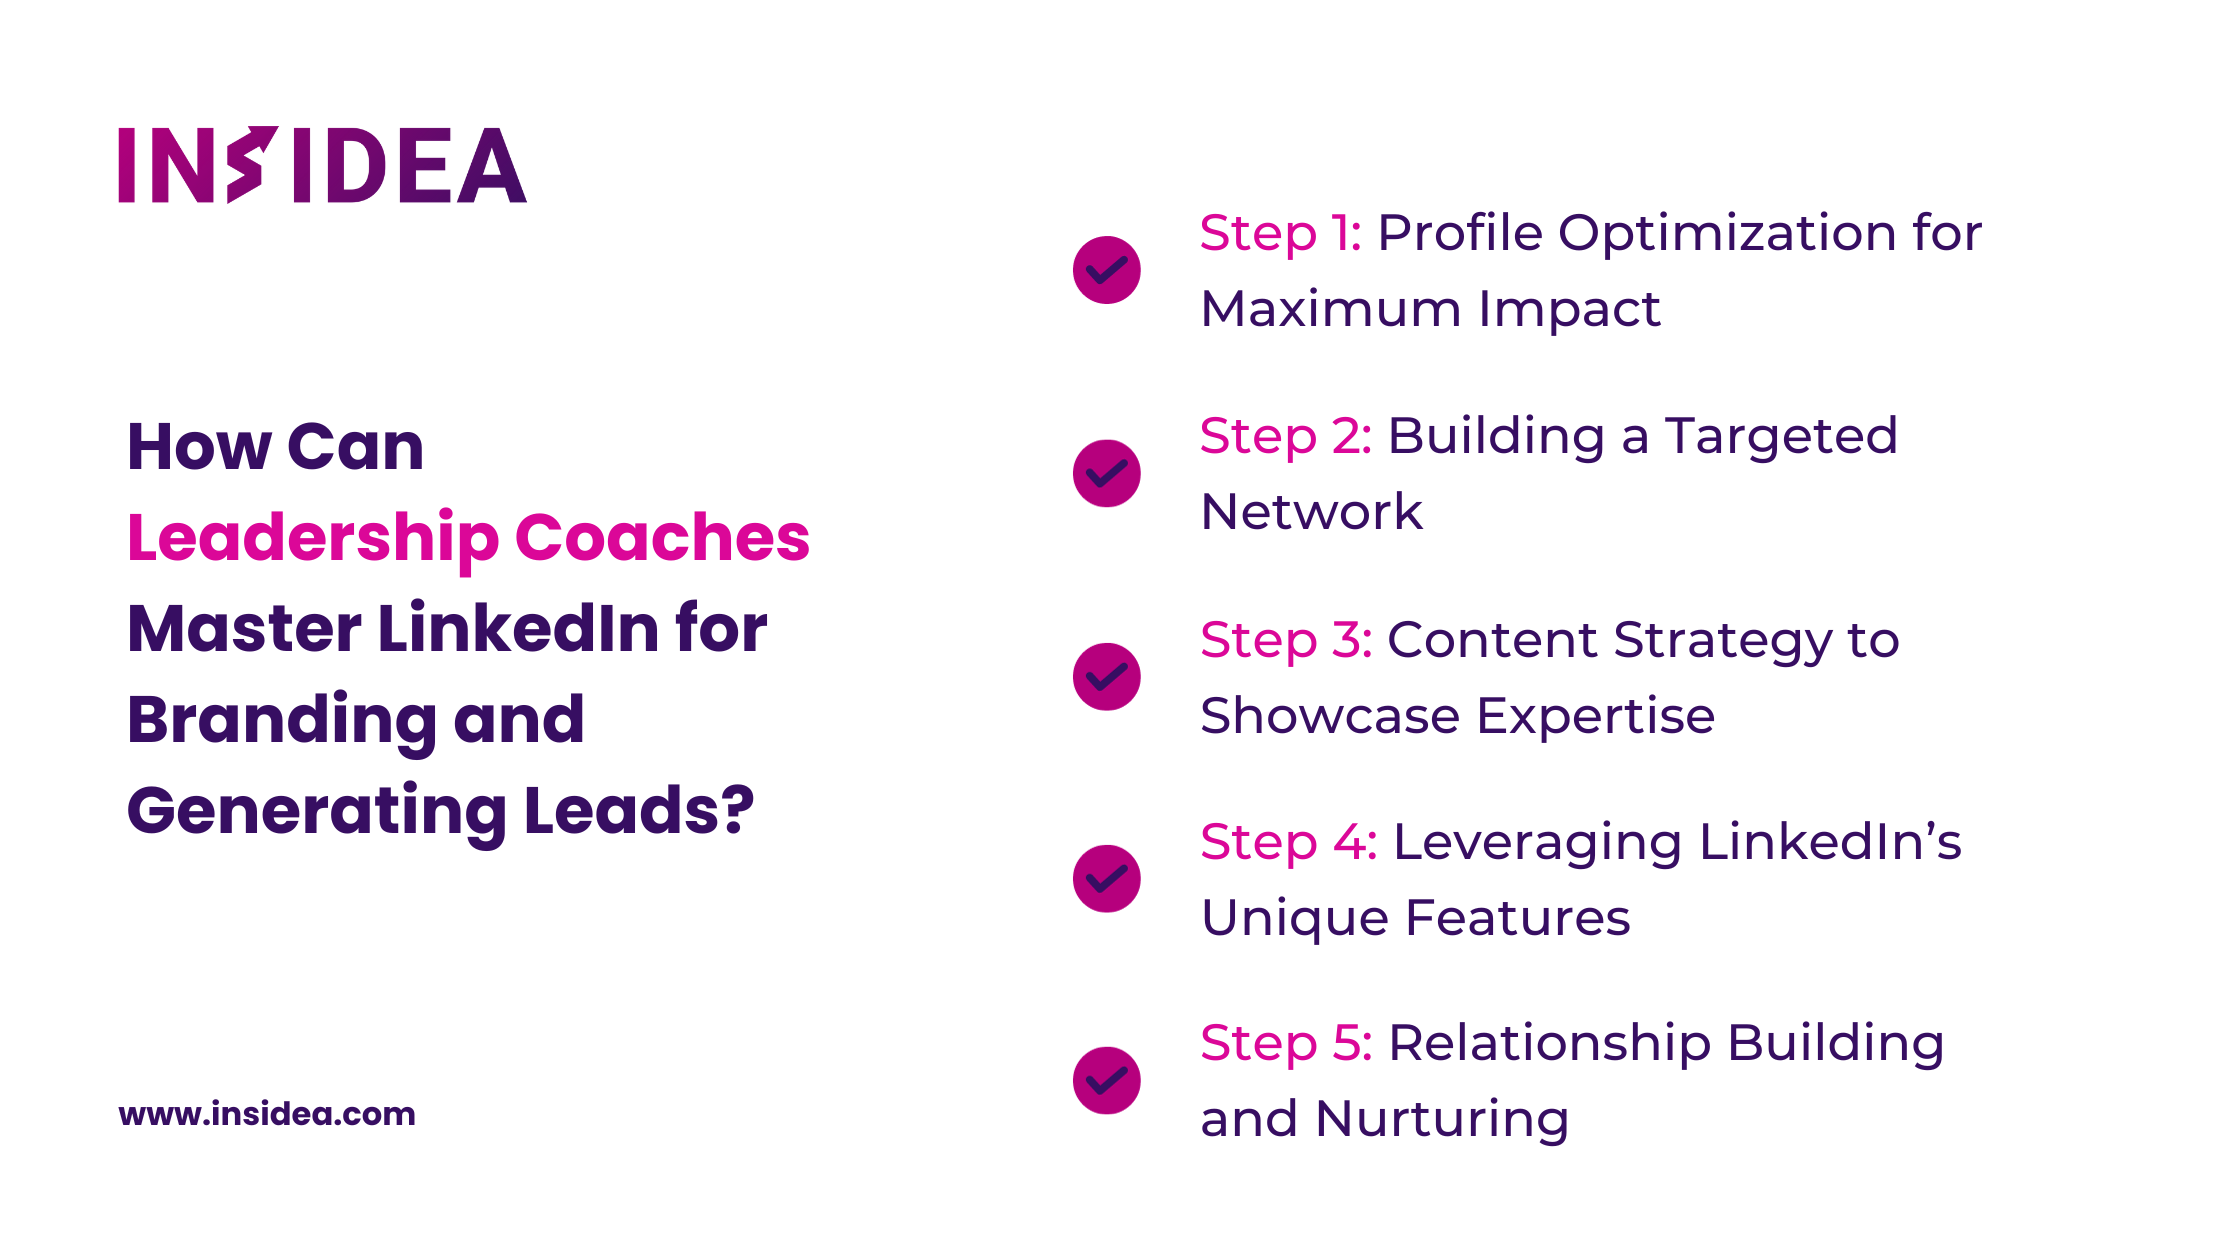 How Can Leadership Coaches Master LinkedIn for Branding and Generating Leads